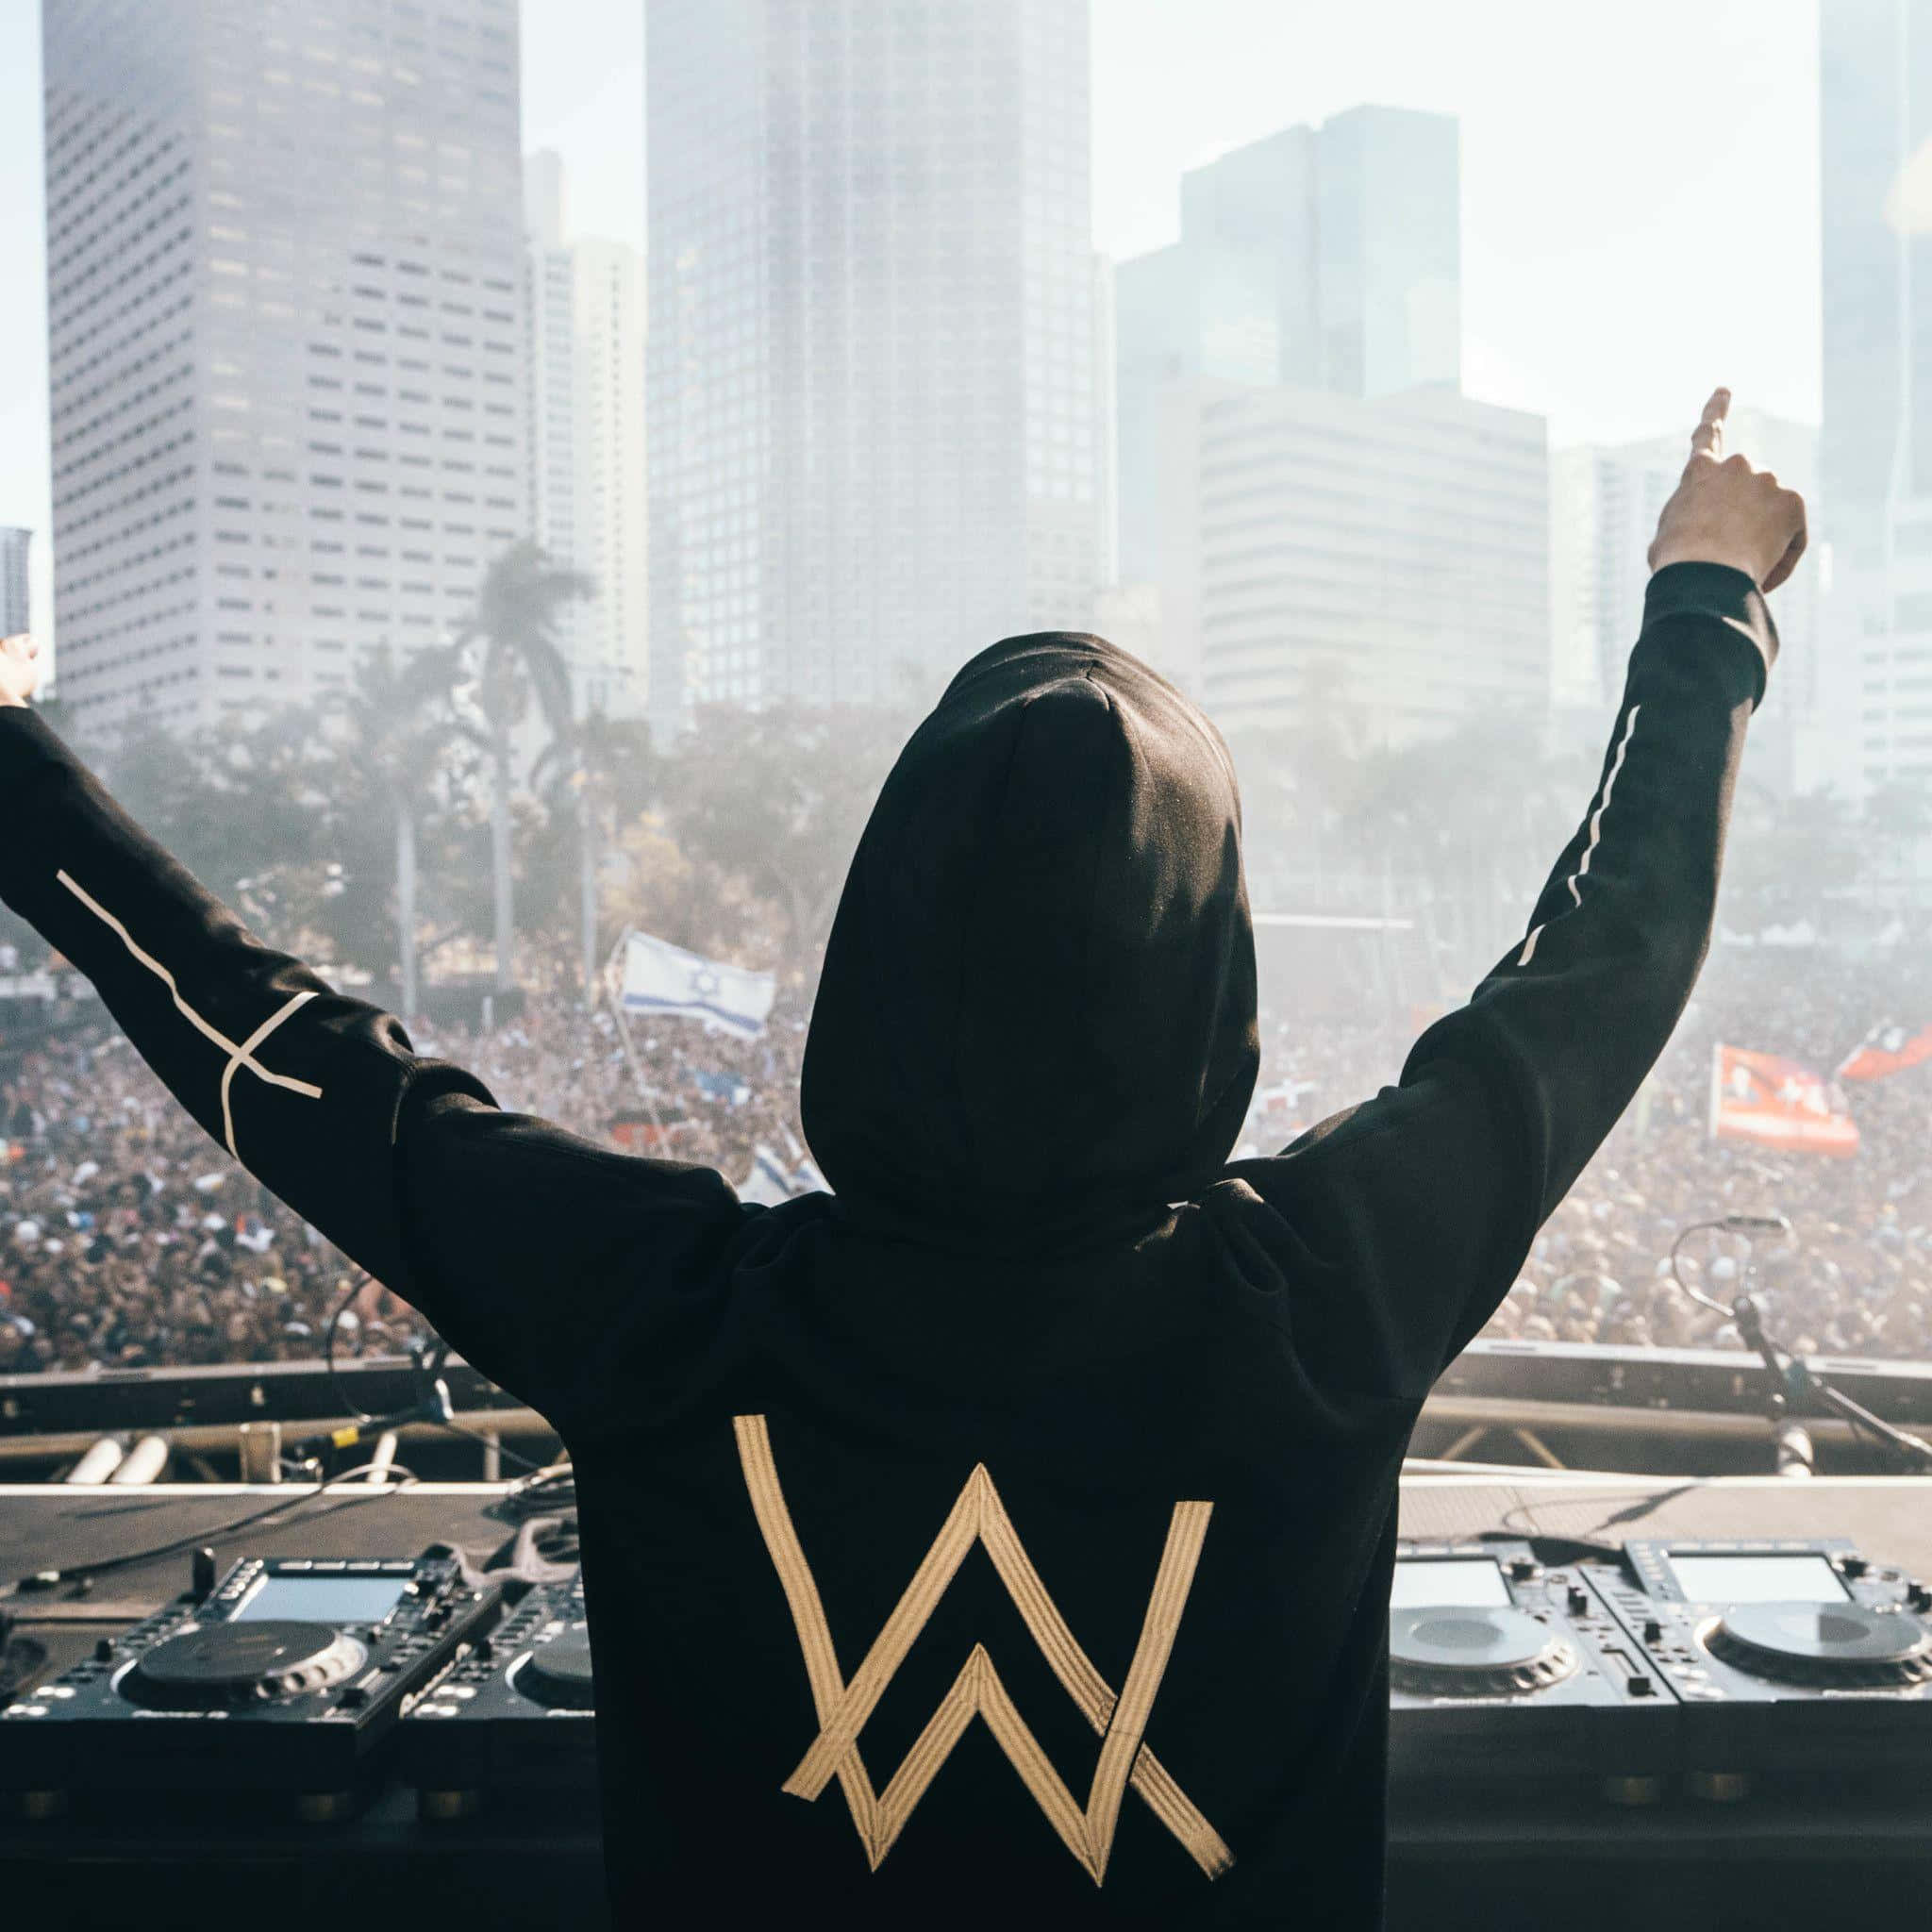 Alan Walker performing live on stage in his iconic hoodie and mask